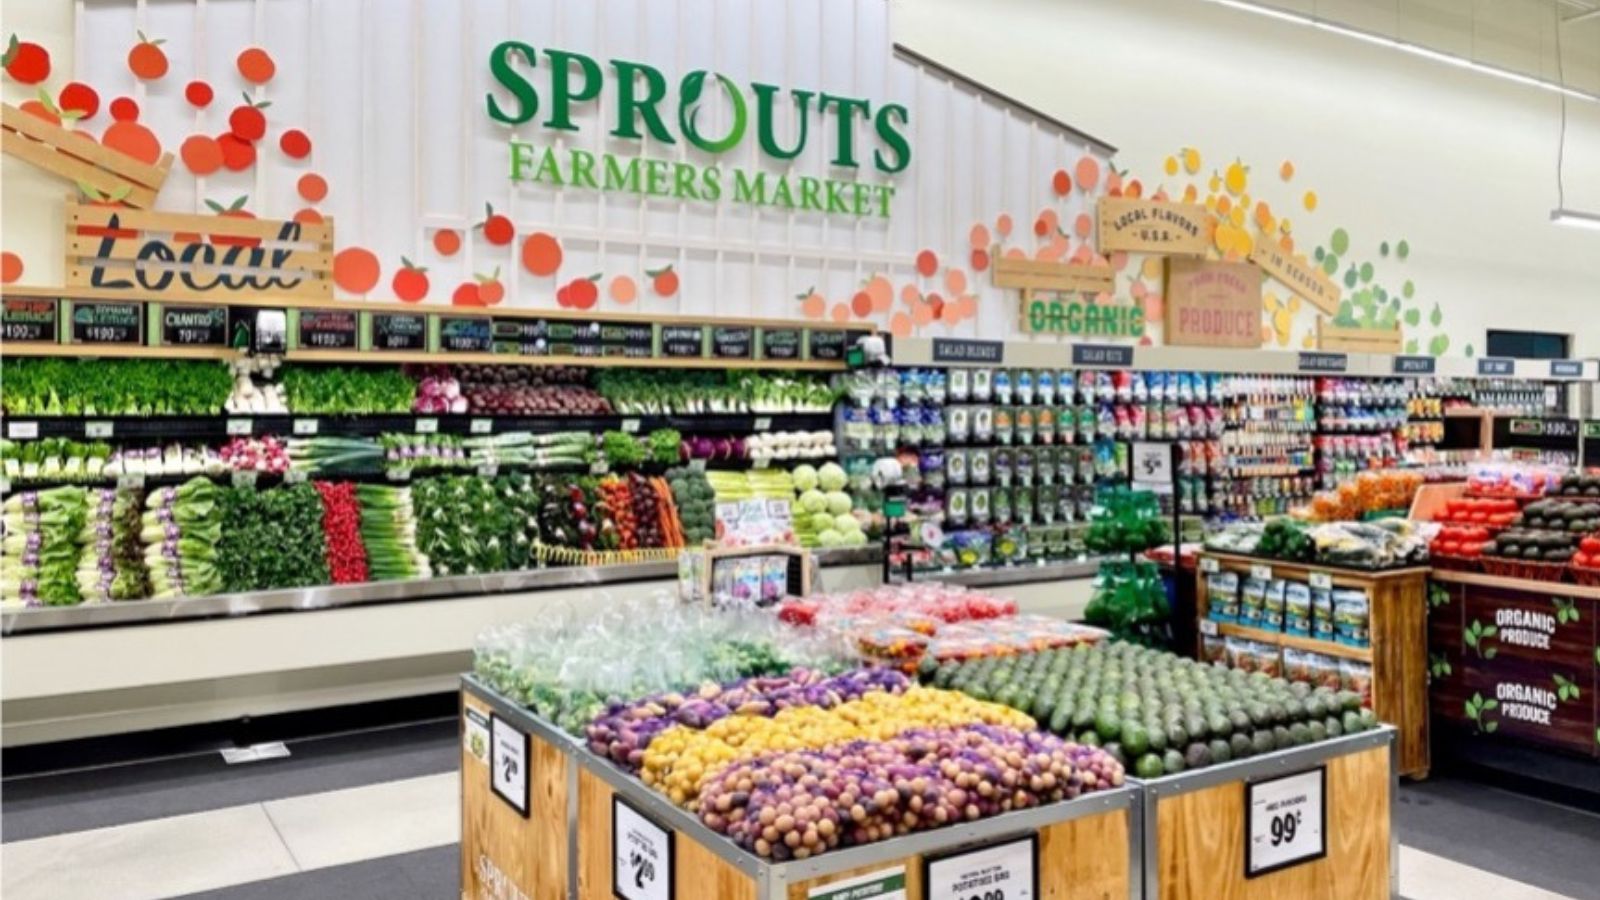 Sprouts Farmers Market hiring for new store opening soon in north Phoenix